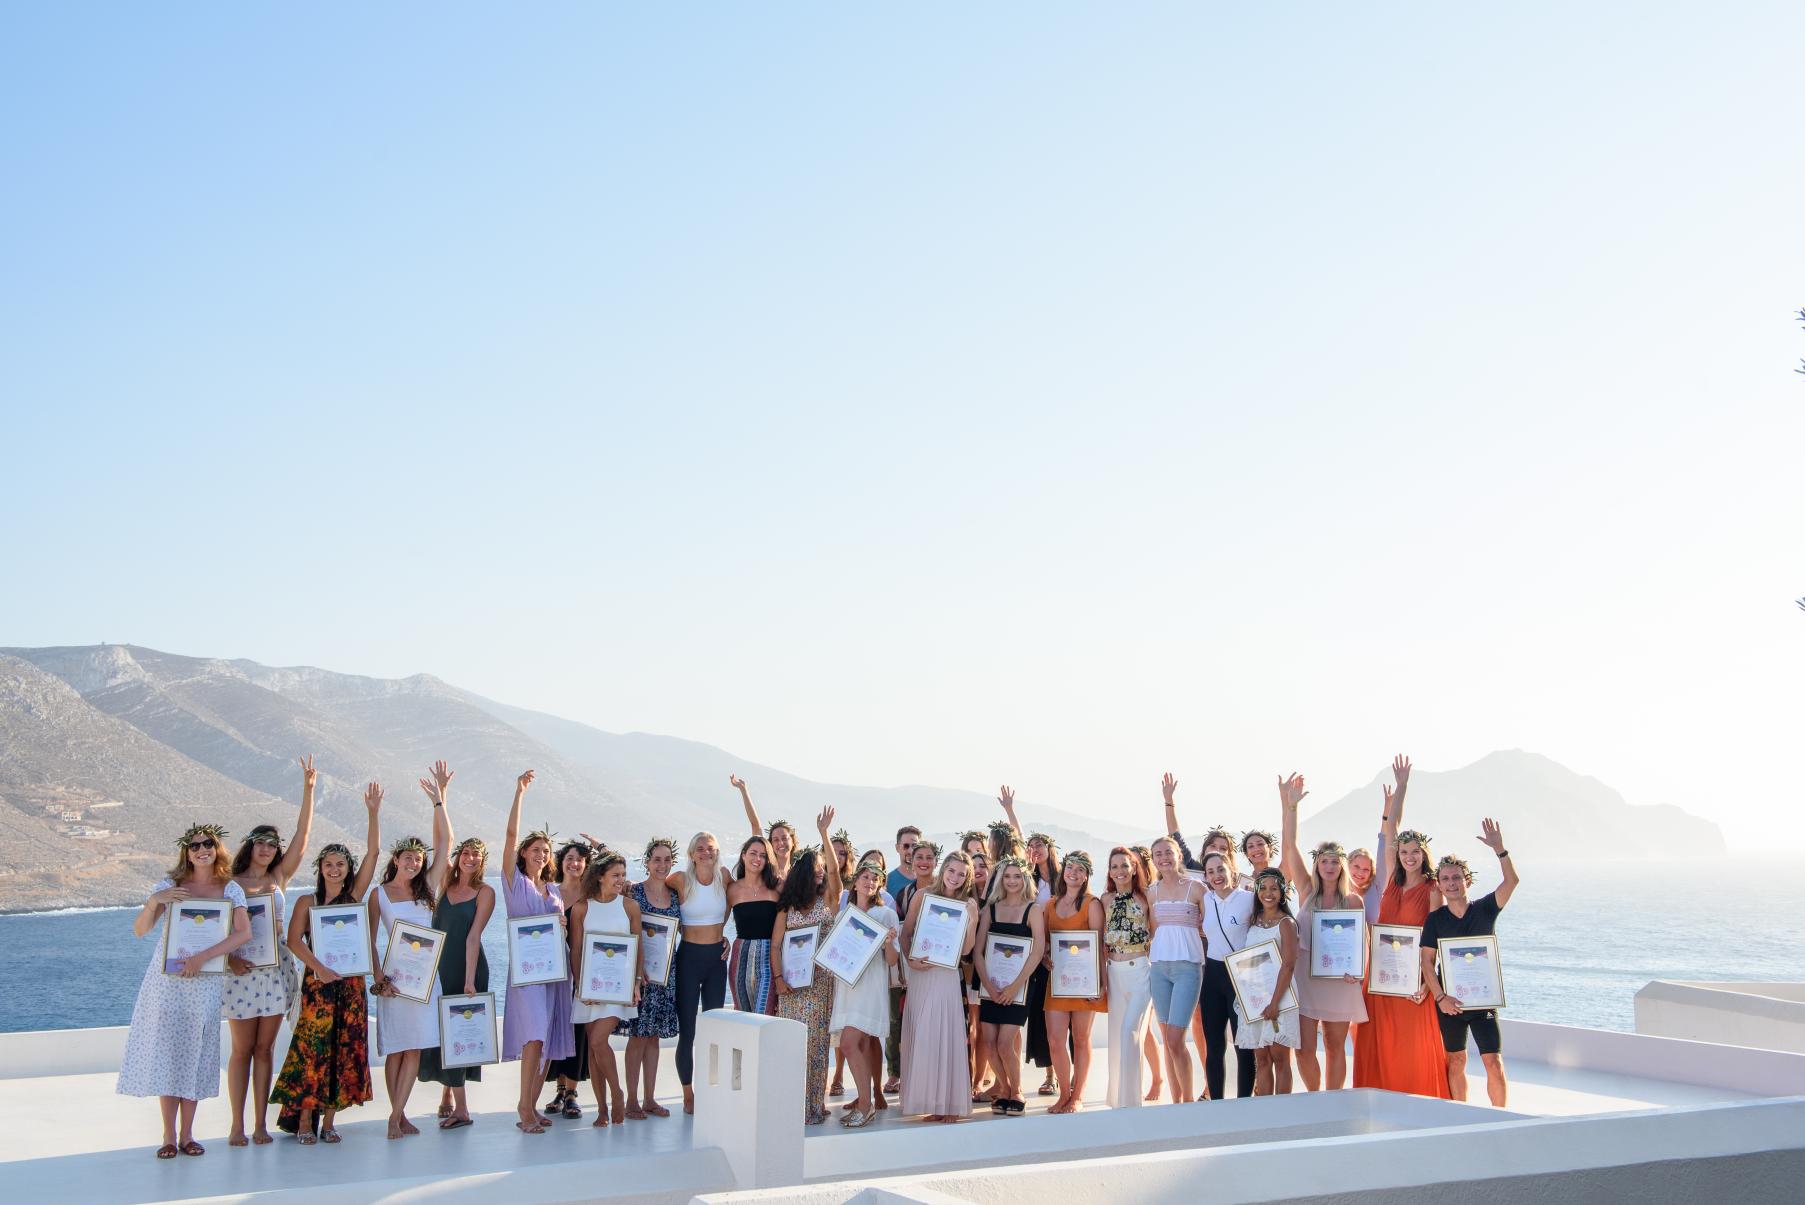 Gratuates at a yoga teacher training school in Greece with a beautiful ocean view